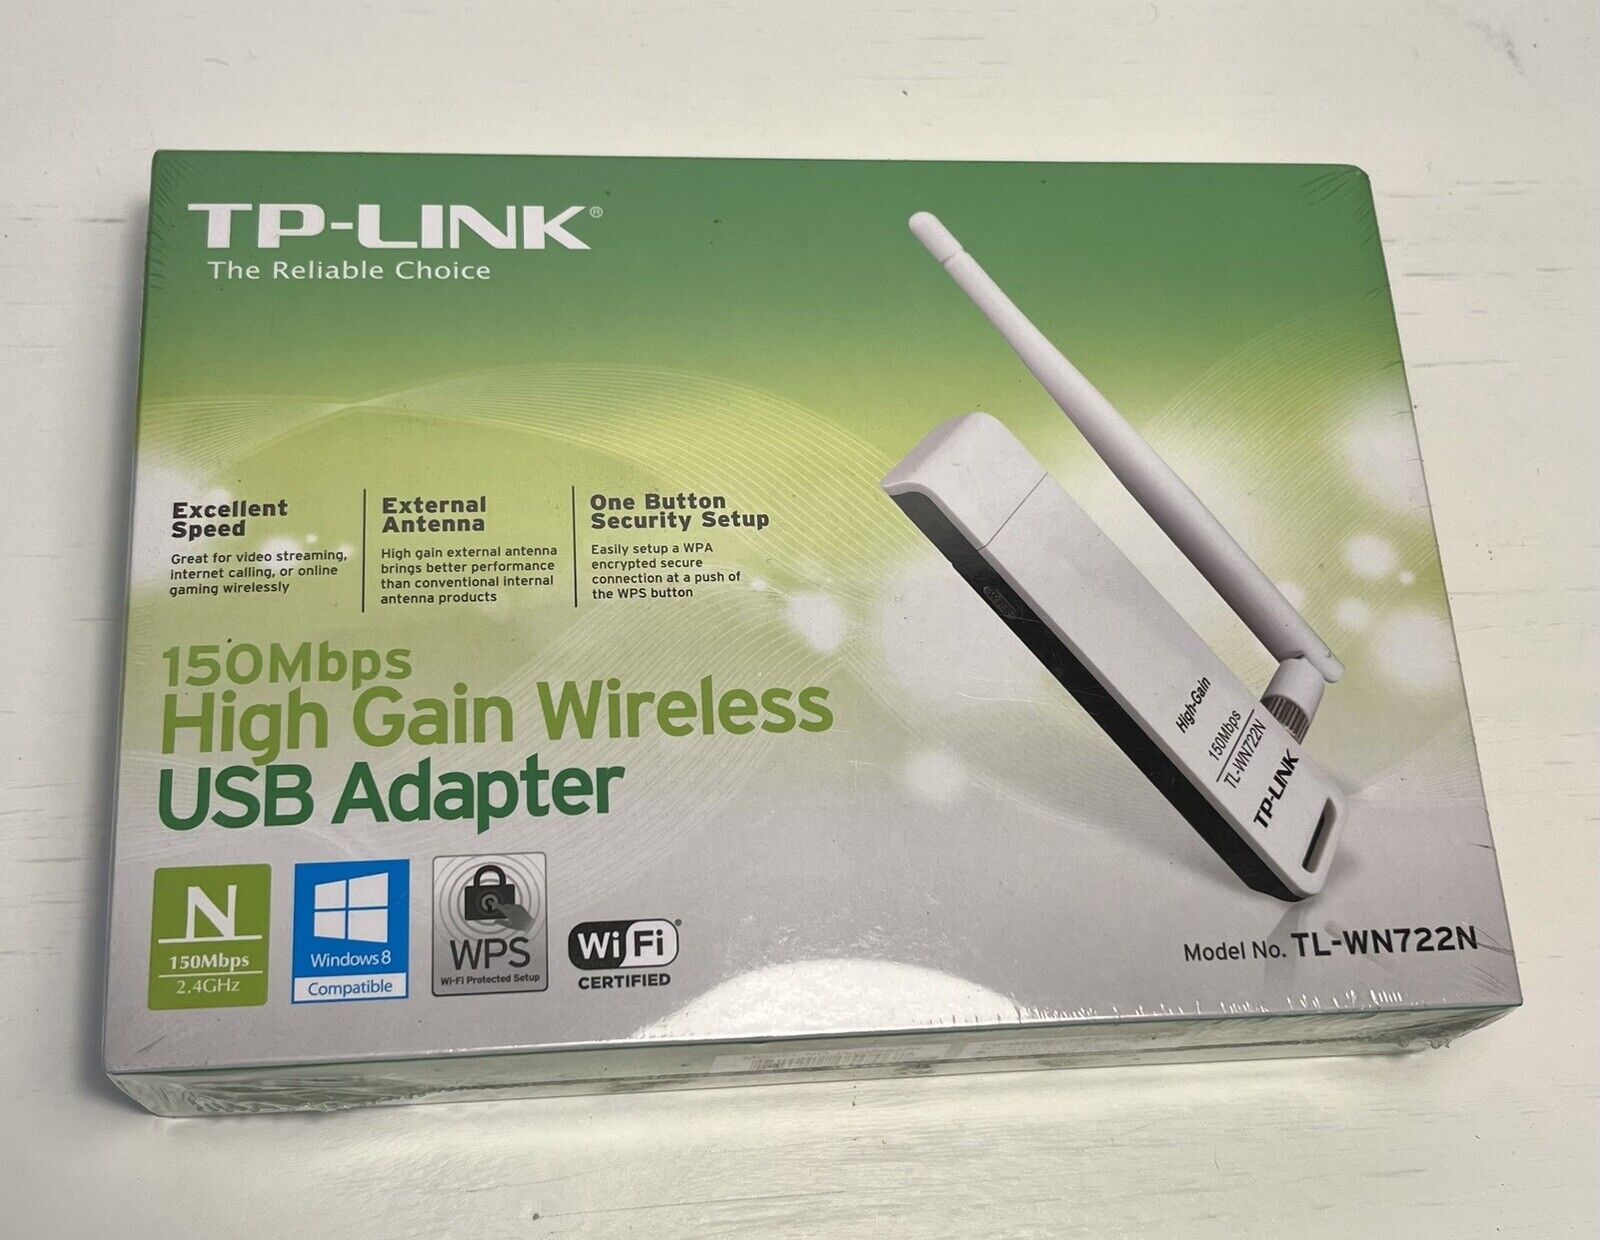 TP-Link TL-WN722N (Ver 1.1) 150Mbps High Gain Wireless USB WiFi Adapter